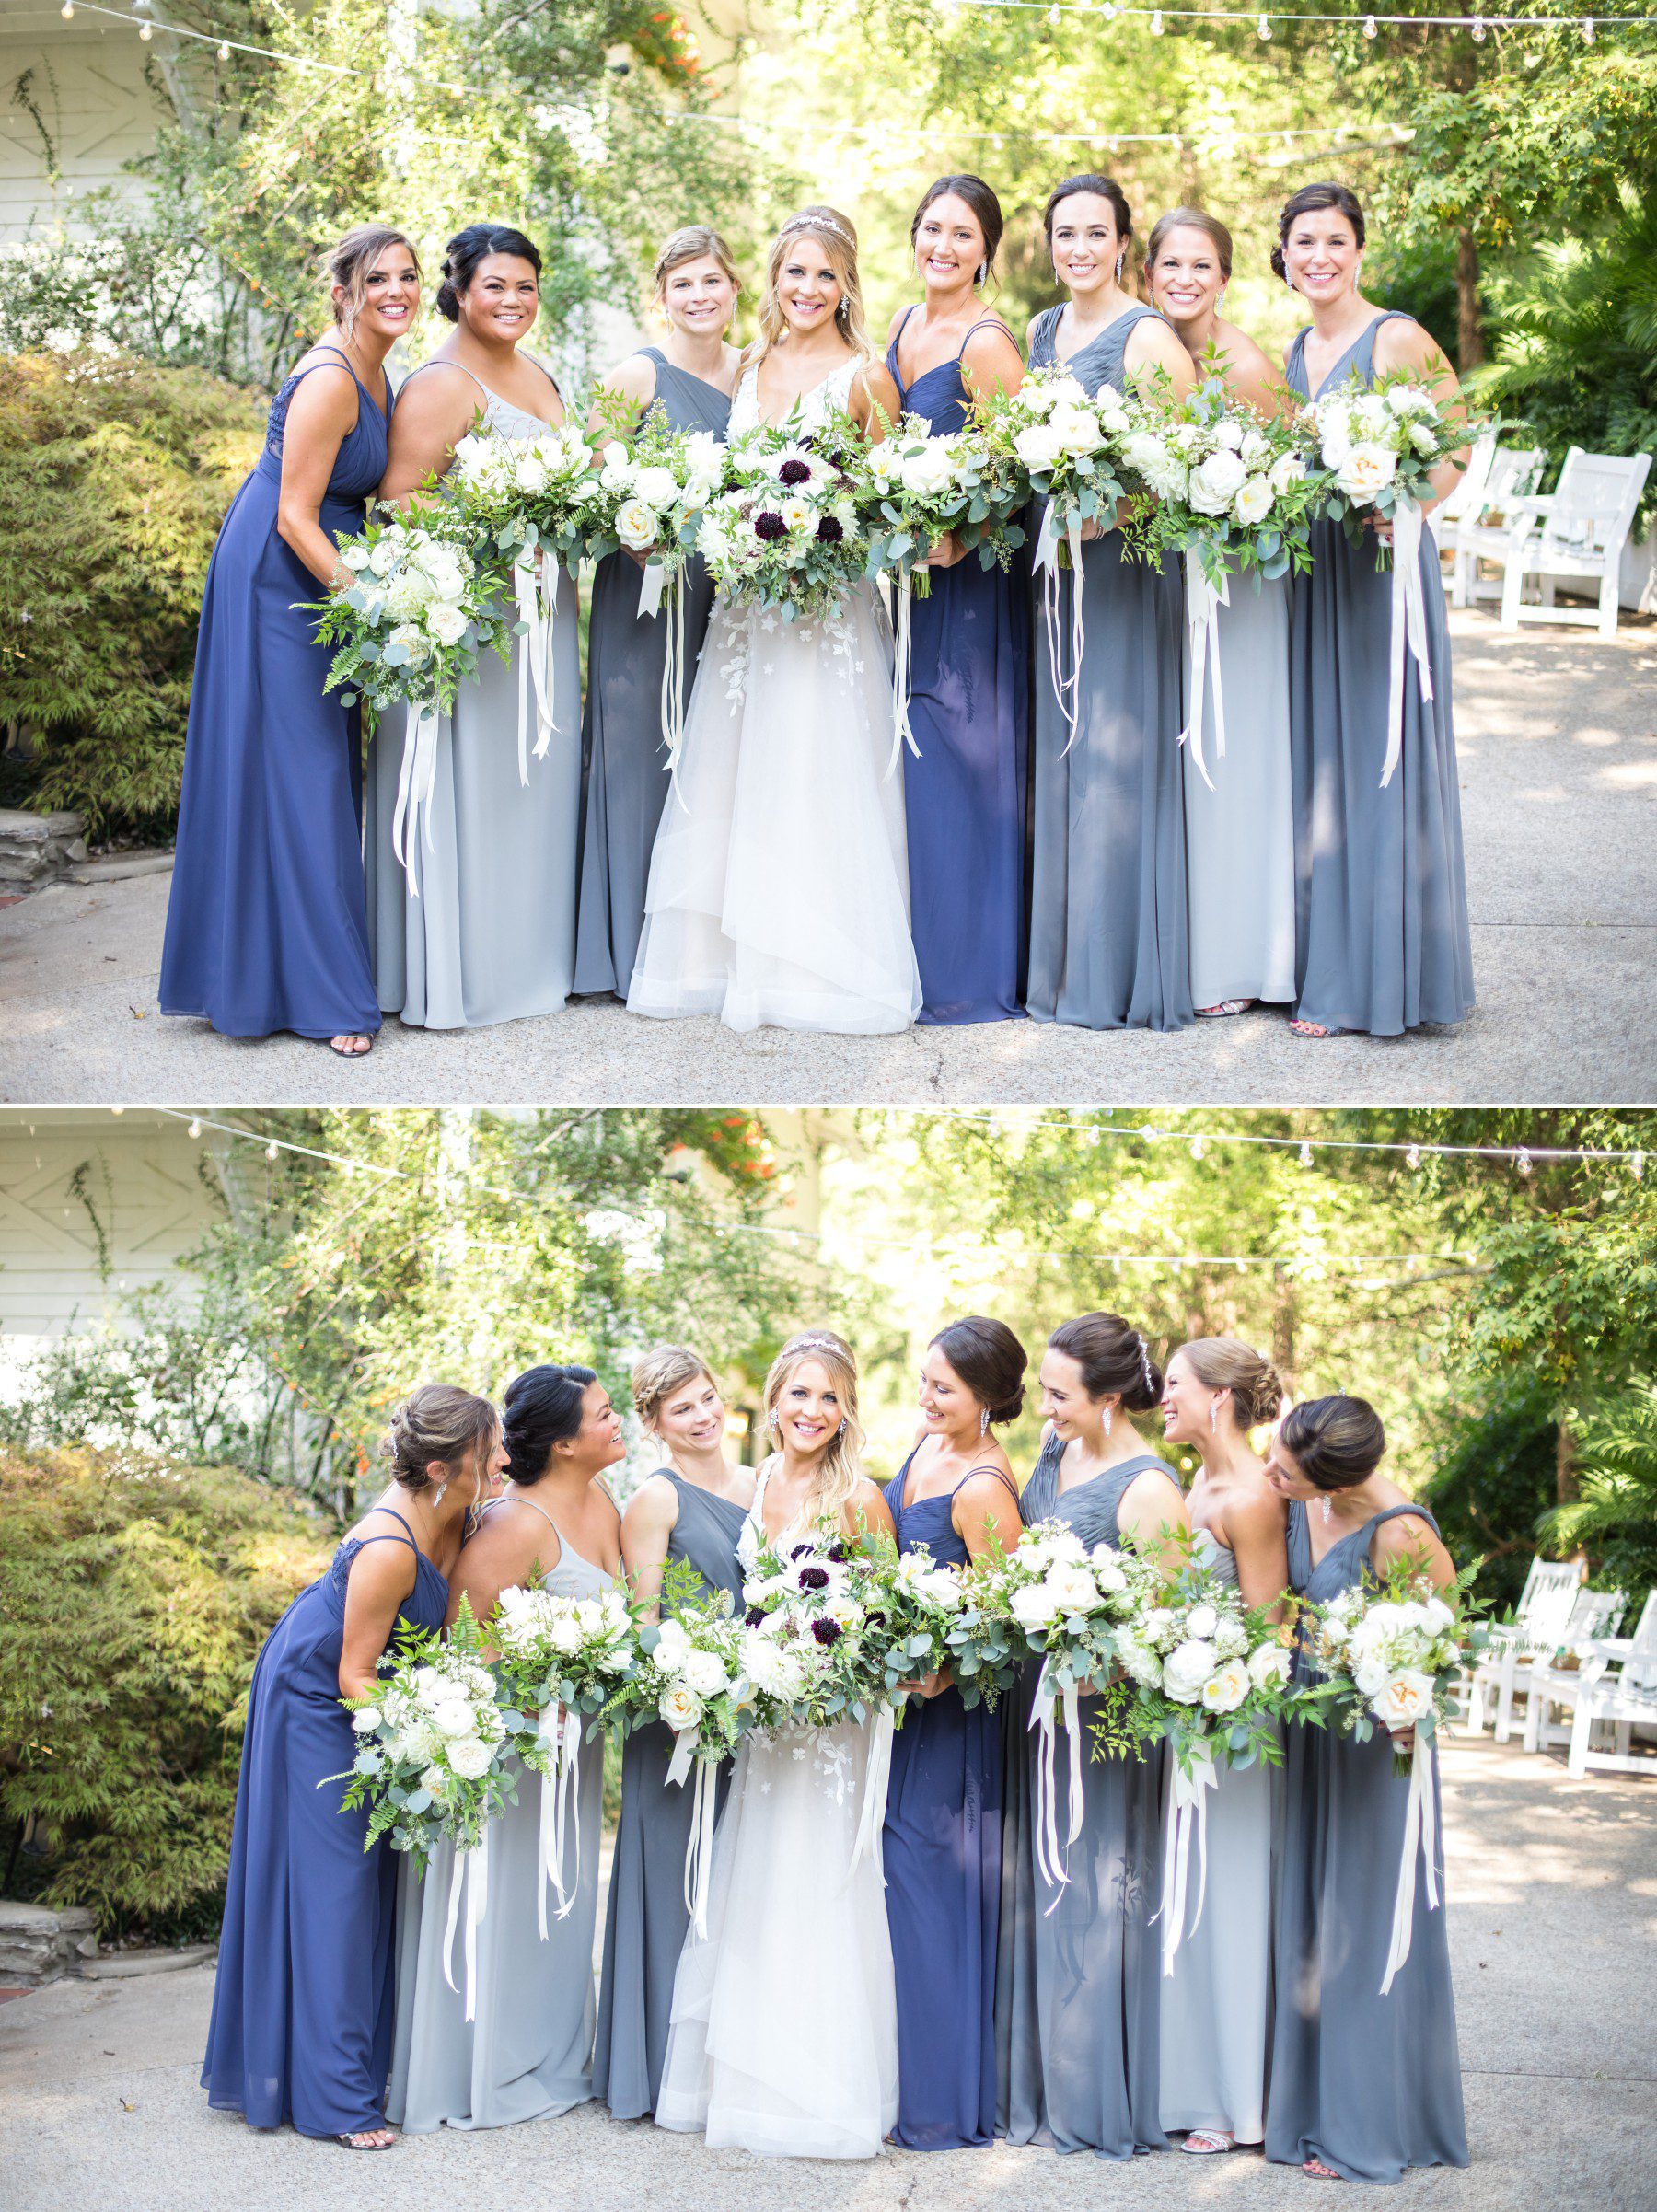 bride and bridesmaids in azazie gowns with bouquets before wedding at cedarwood nashville TN, photos by Krista Lee